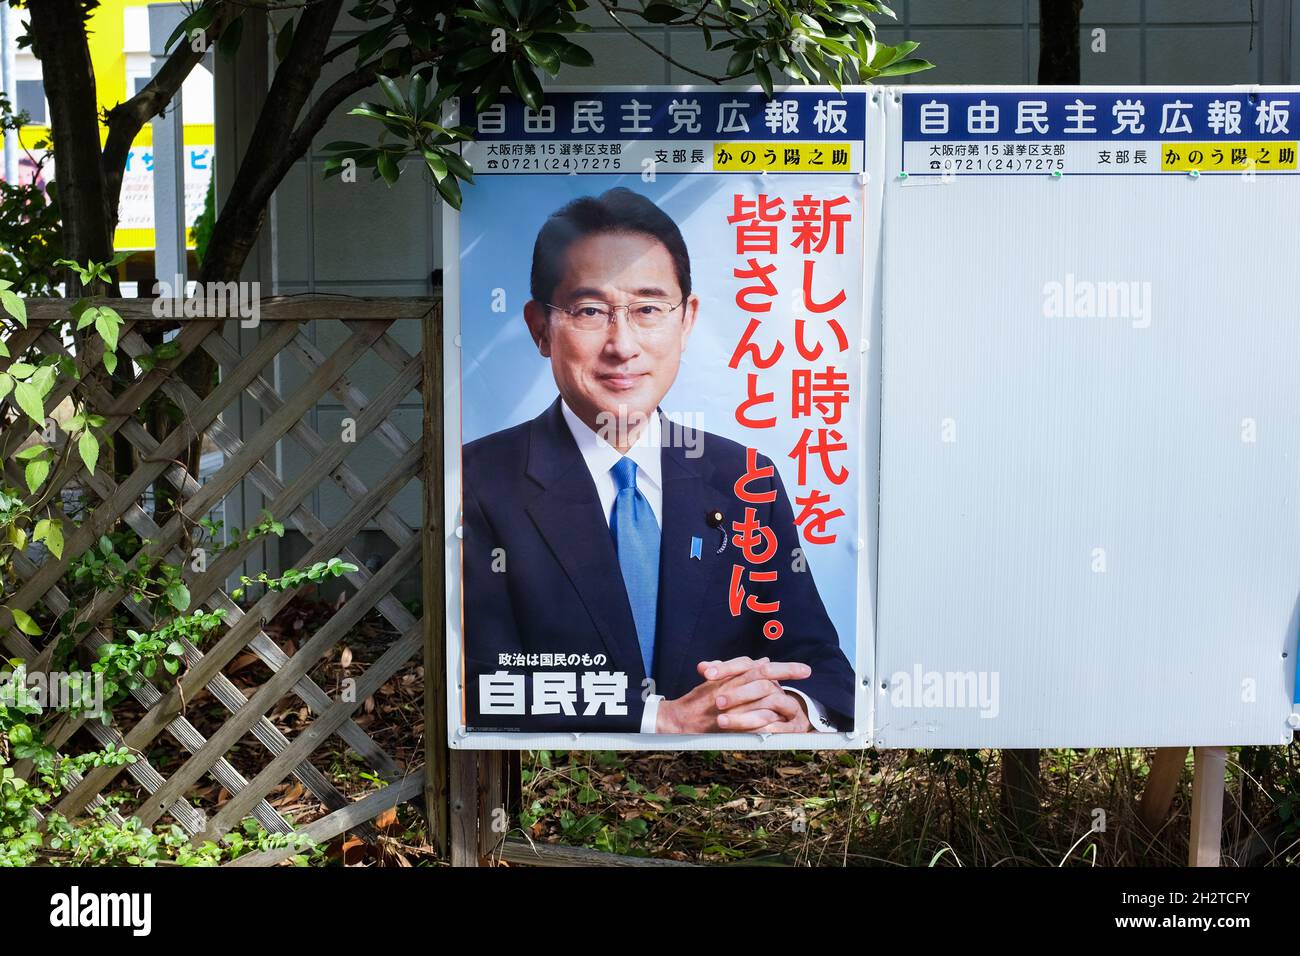 A poster for Japan's Liberal Democratic Party (Jimintō) ahead of the general election on 31 October, 2021. The poster shows Japanese PM Fumio Kishida. Stock Photo